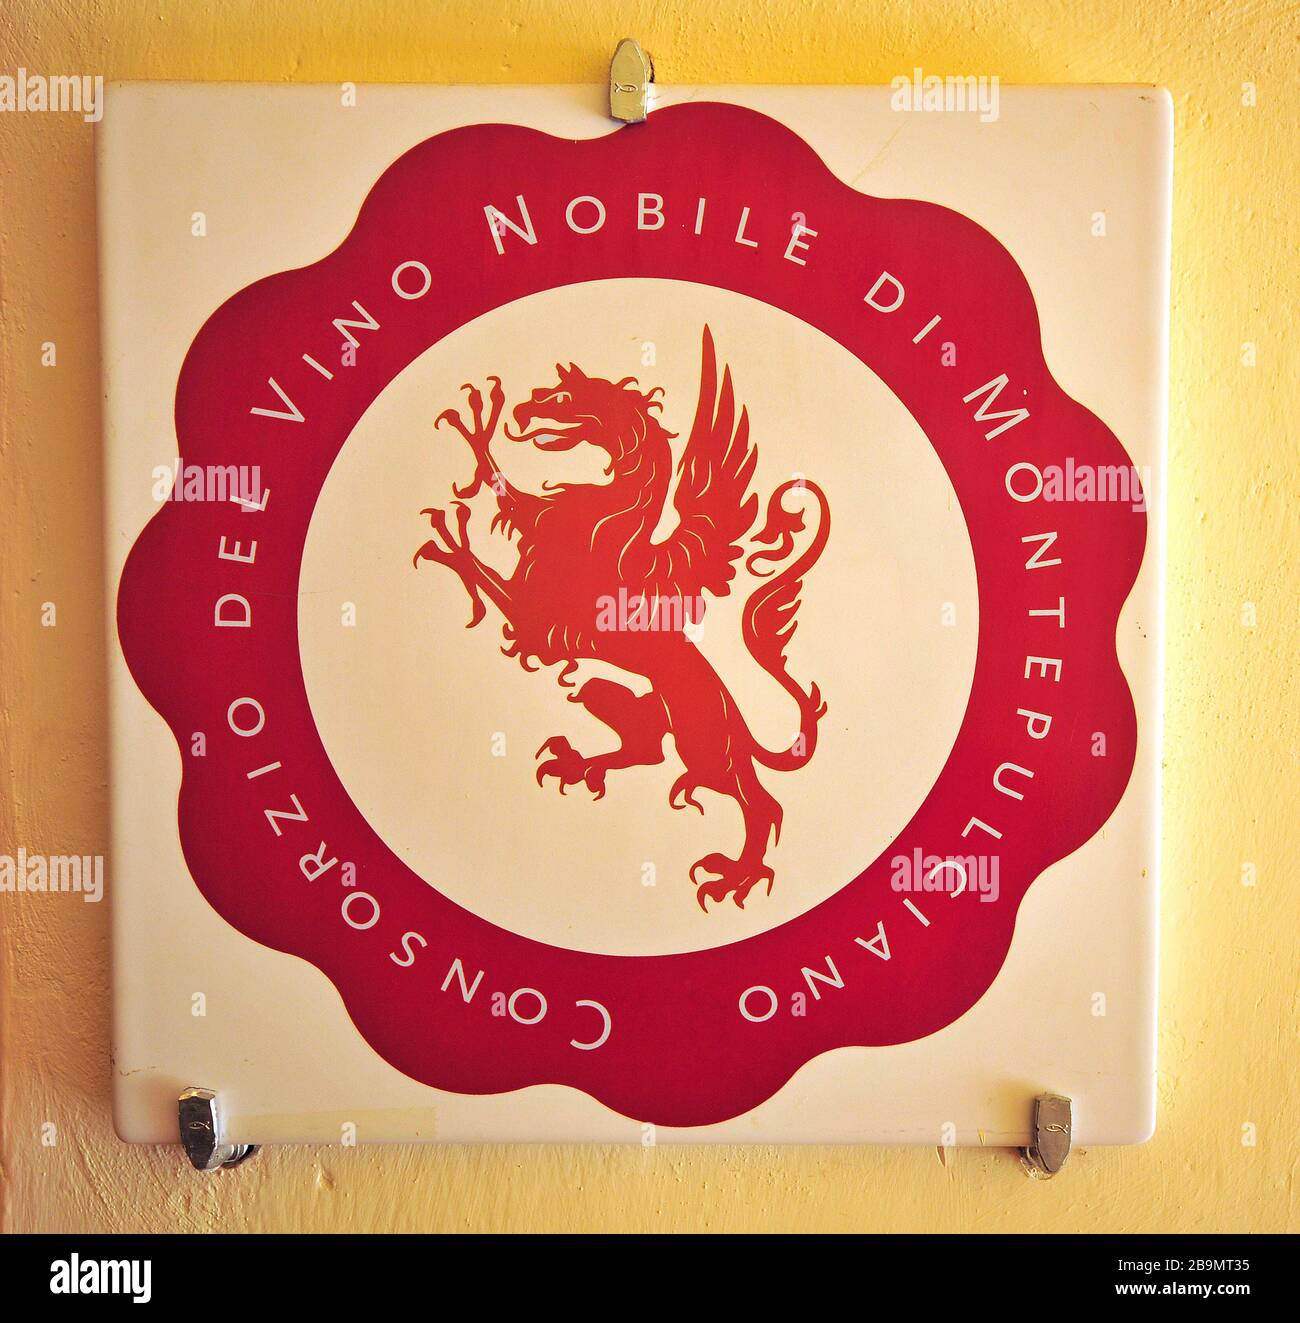 Sign of Vino Nobile of Montepulciano Consortium (with hippogriff emblem), Montepulciano, Tuscany, Italy Stock Photo